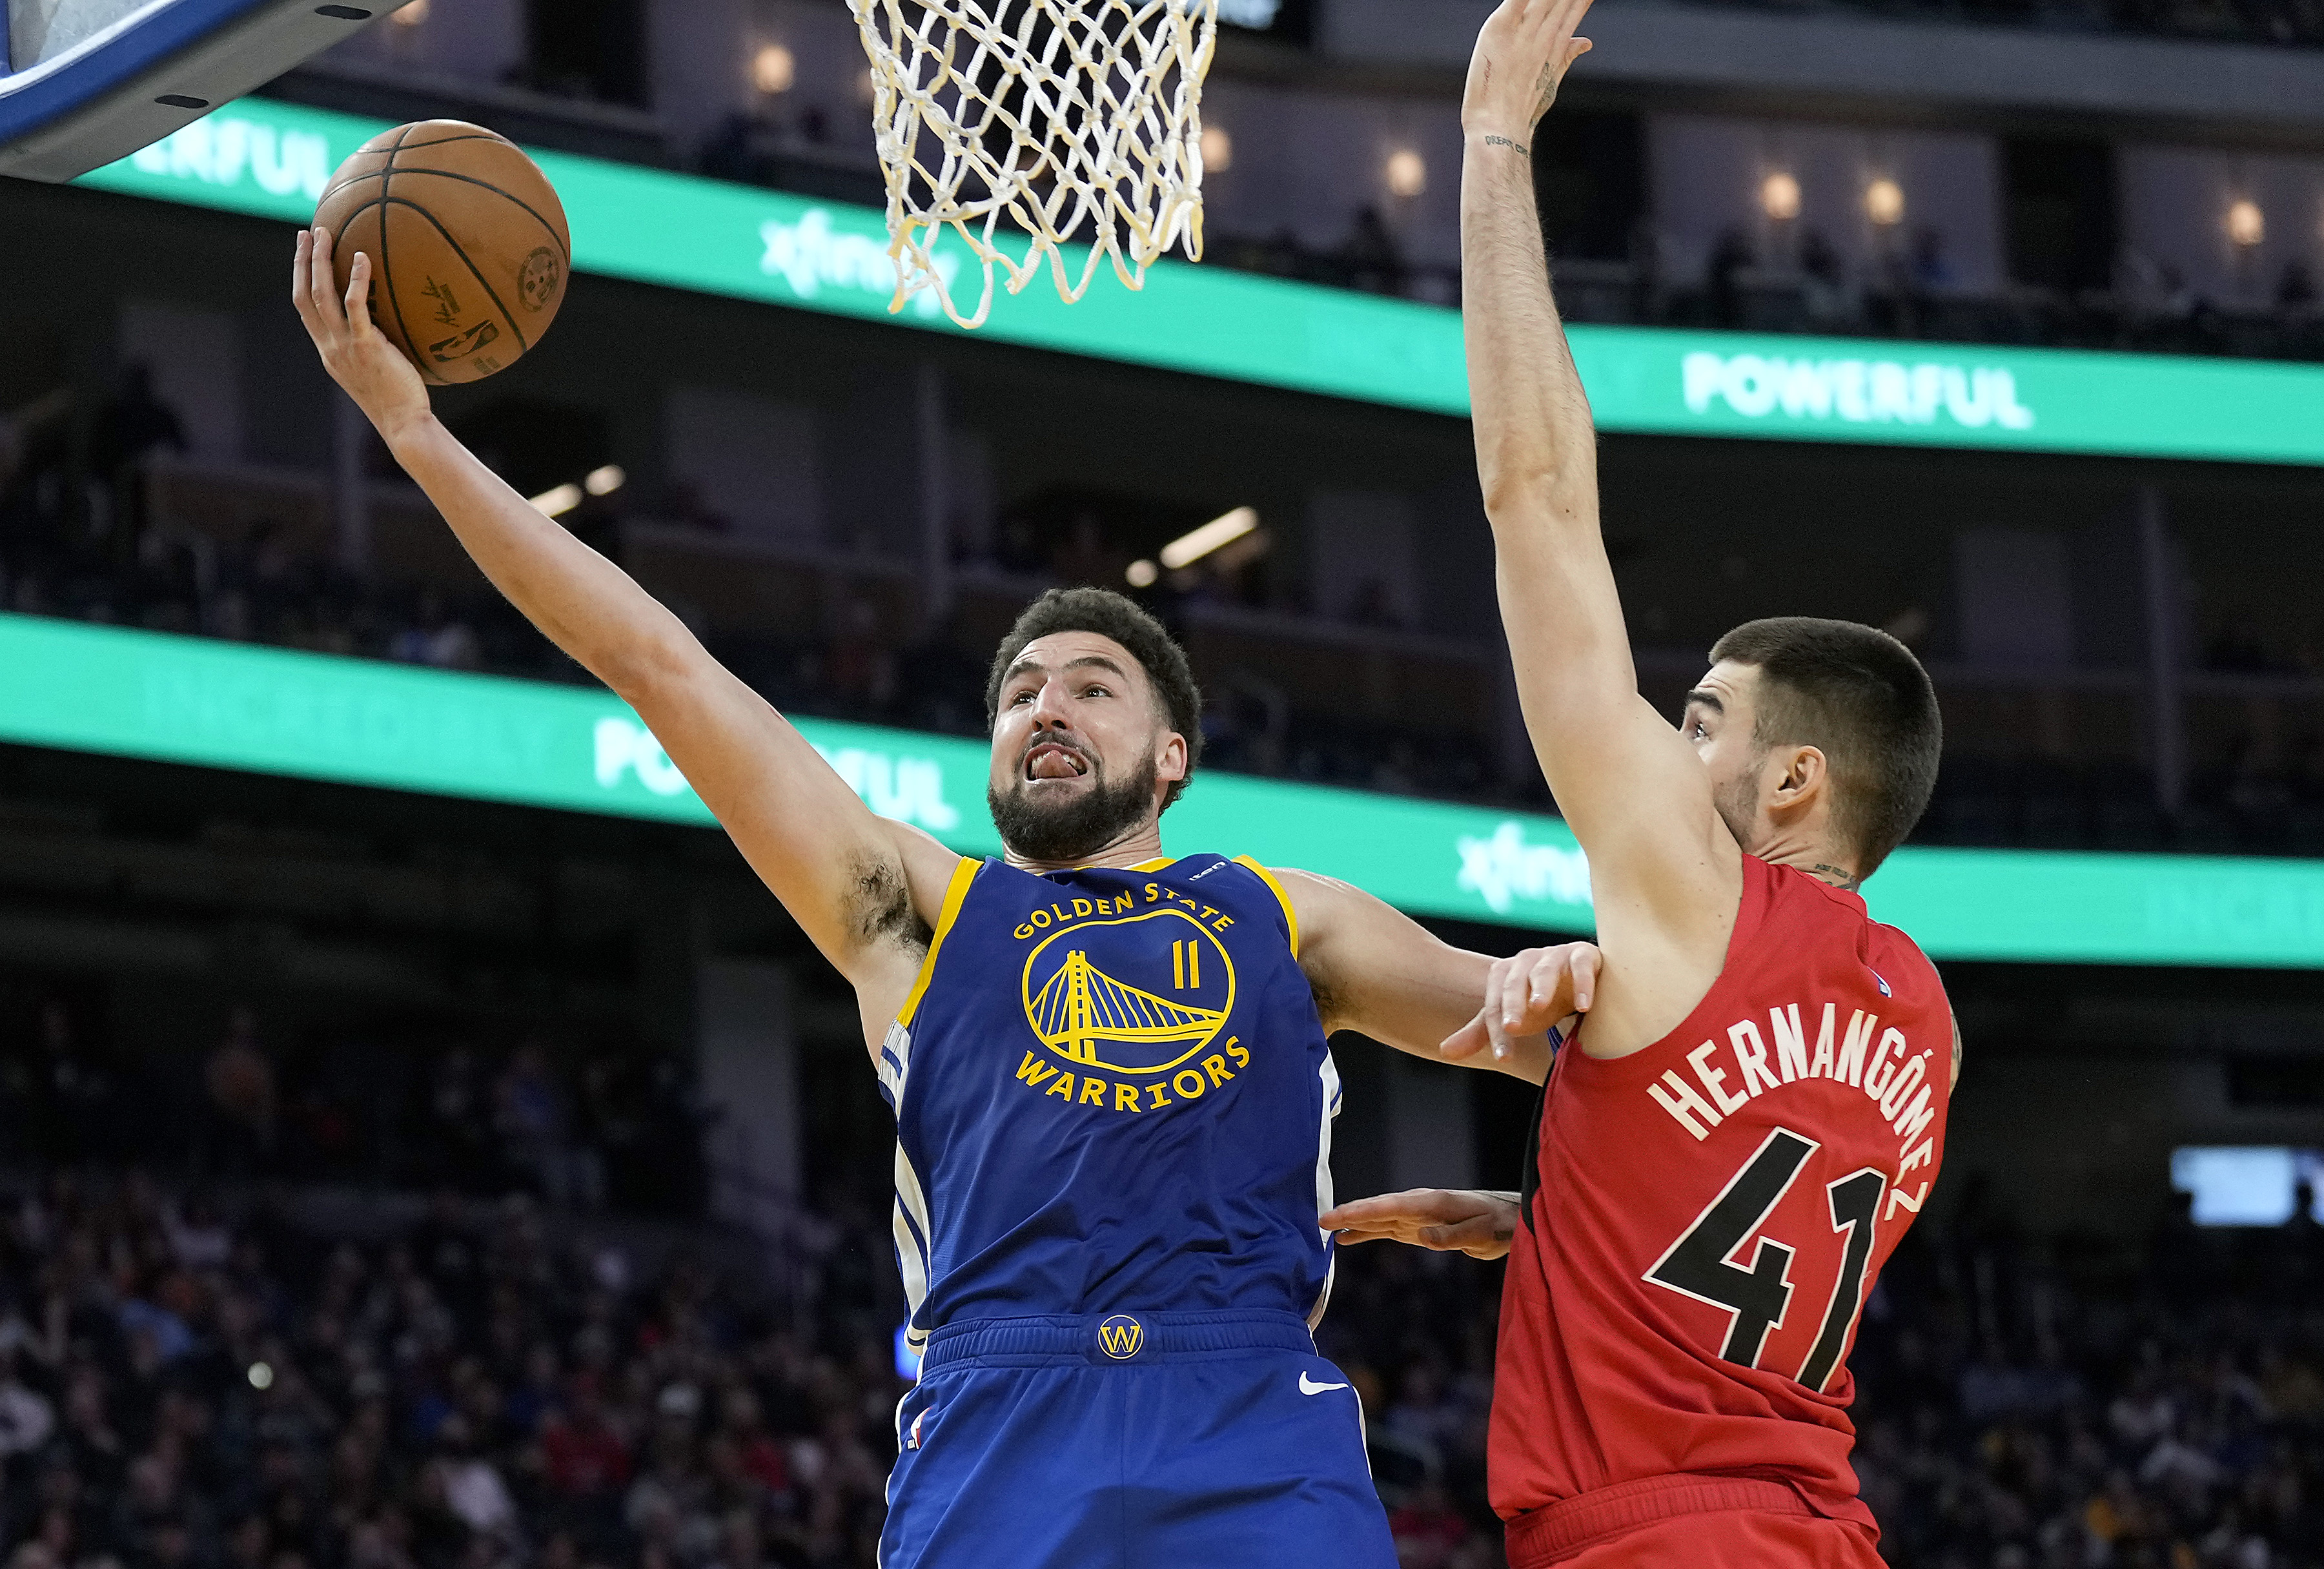 Warriors Steph Curry Sends Message on Klay Thompson